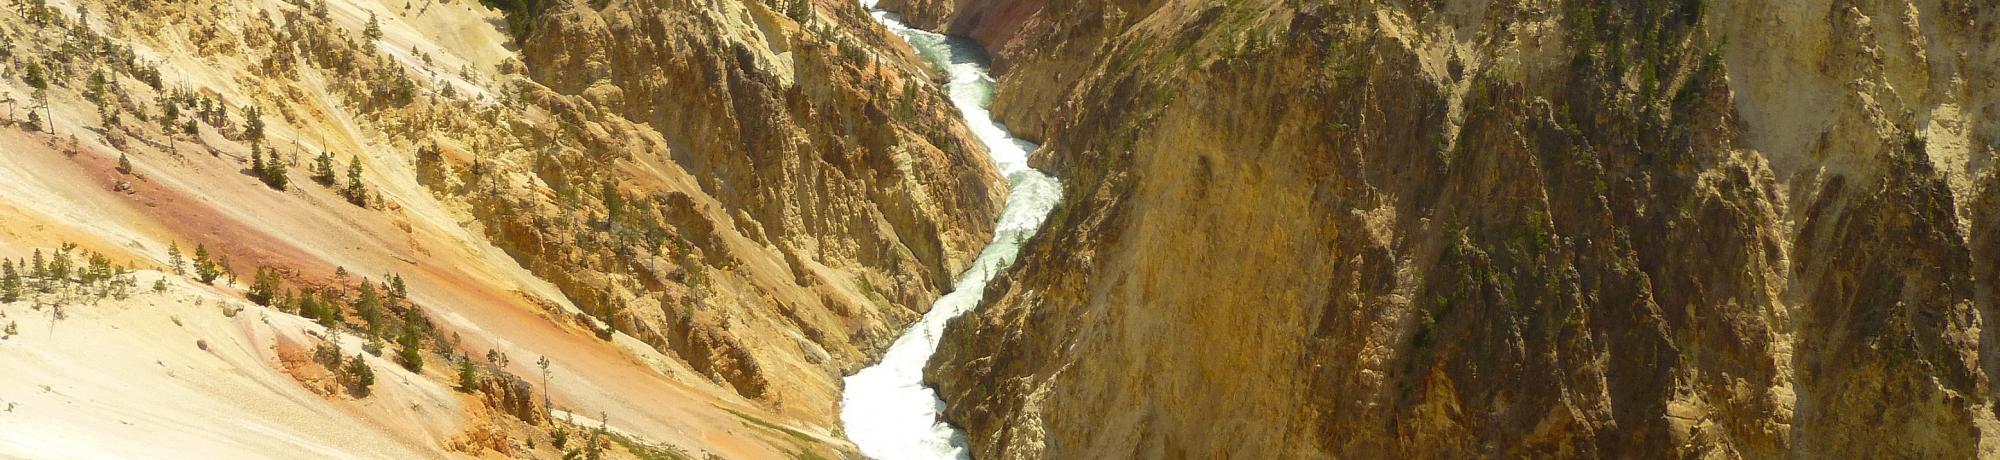 Image: the rapid Yellowstone River cuts through mountainous terrain to form a canyon. Photo credit Josh Grant of AQRC.